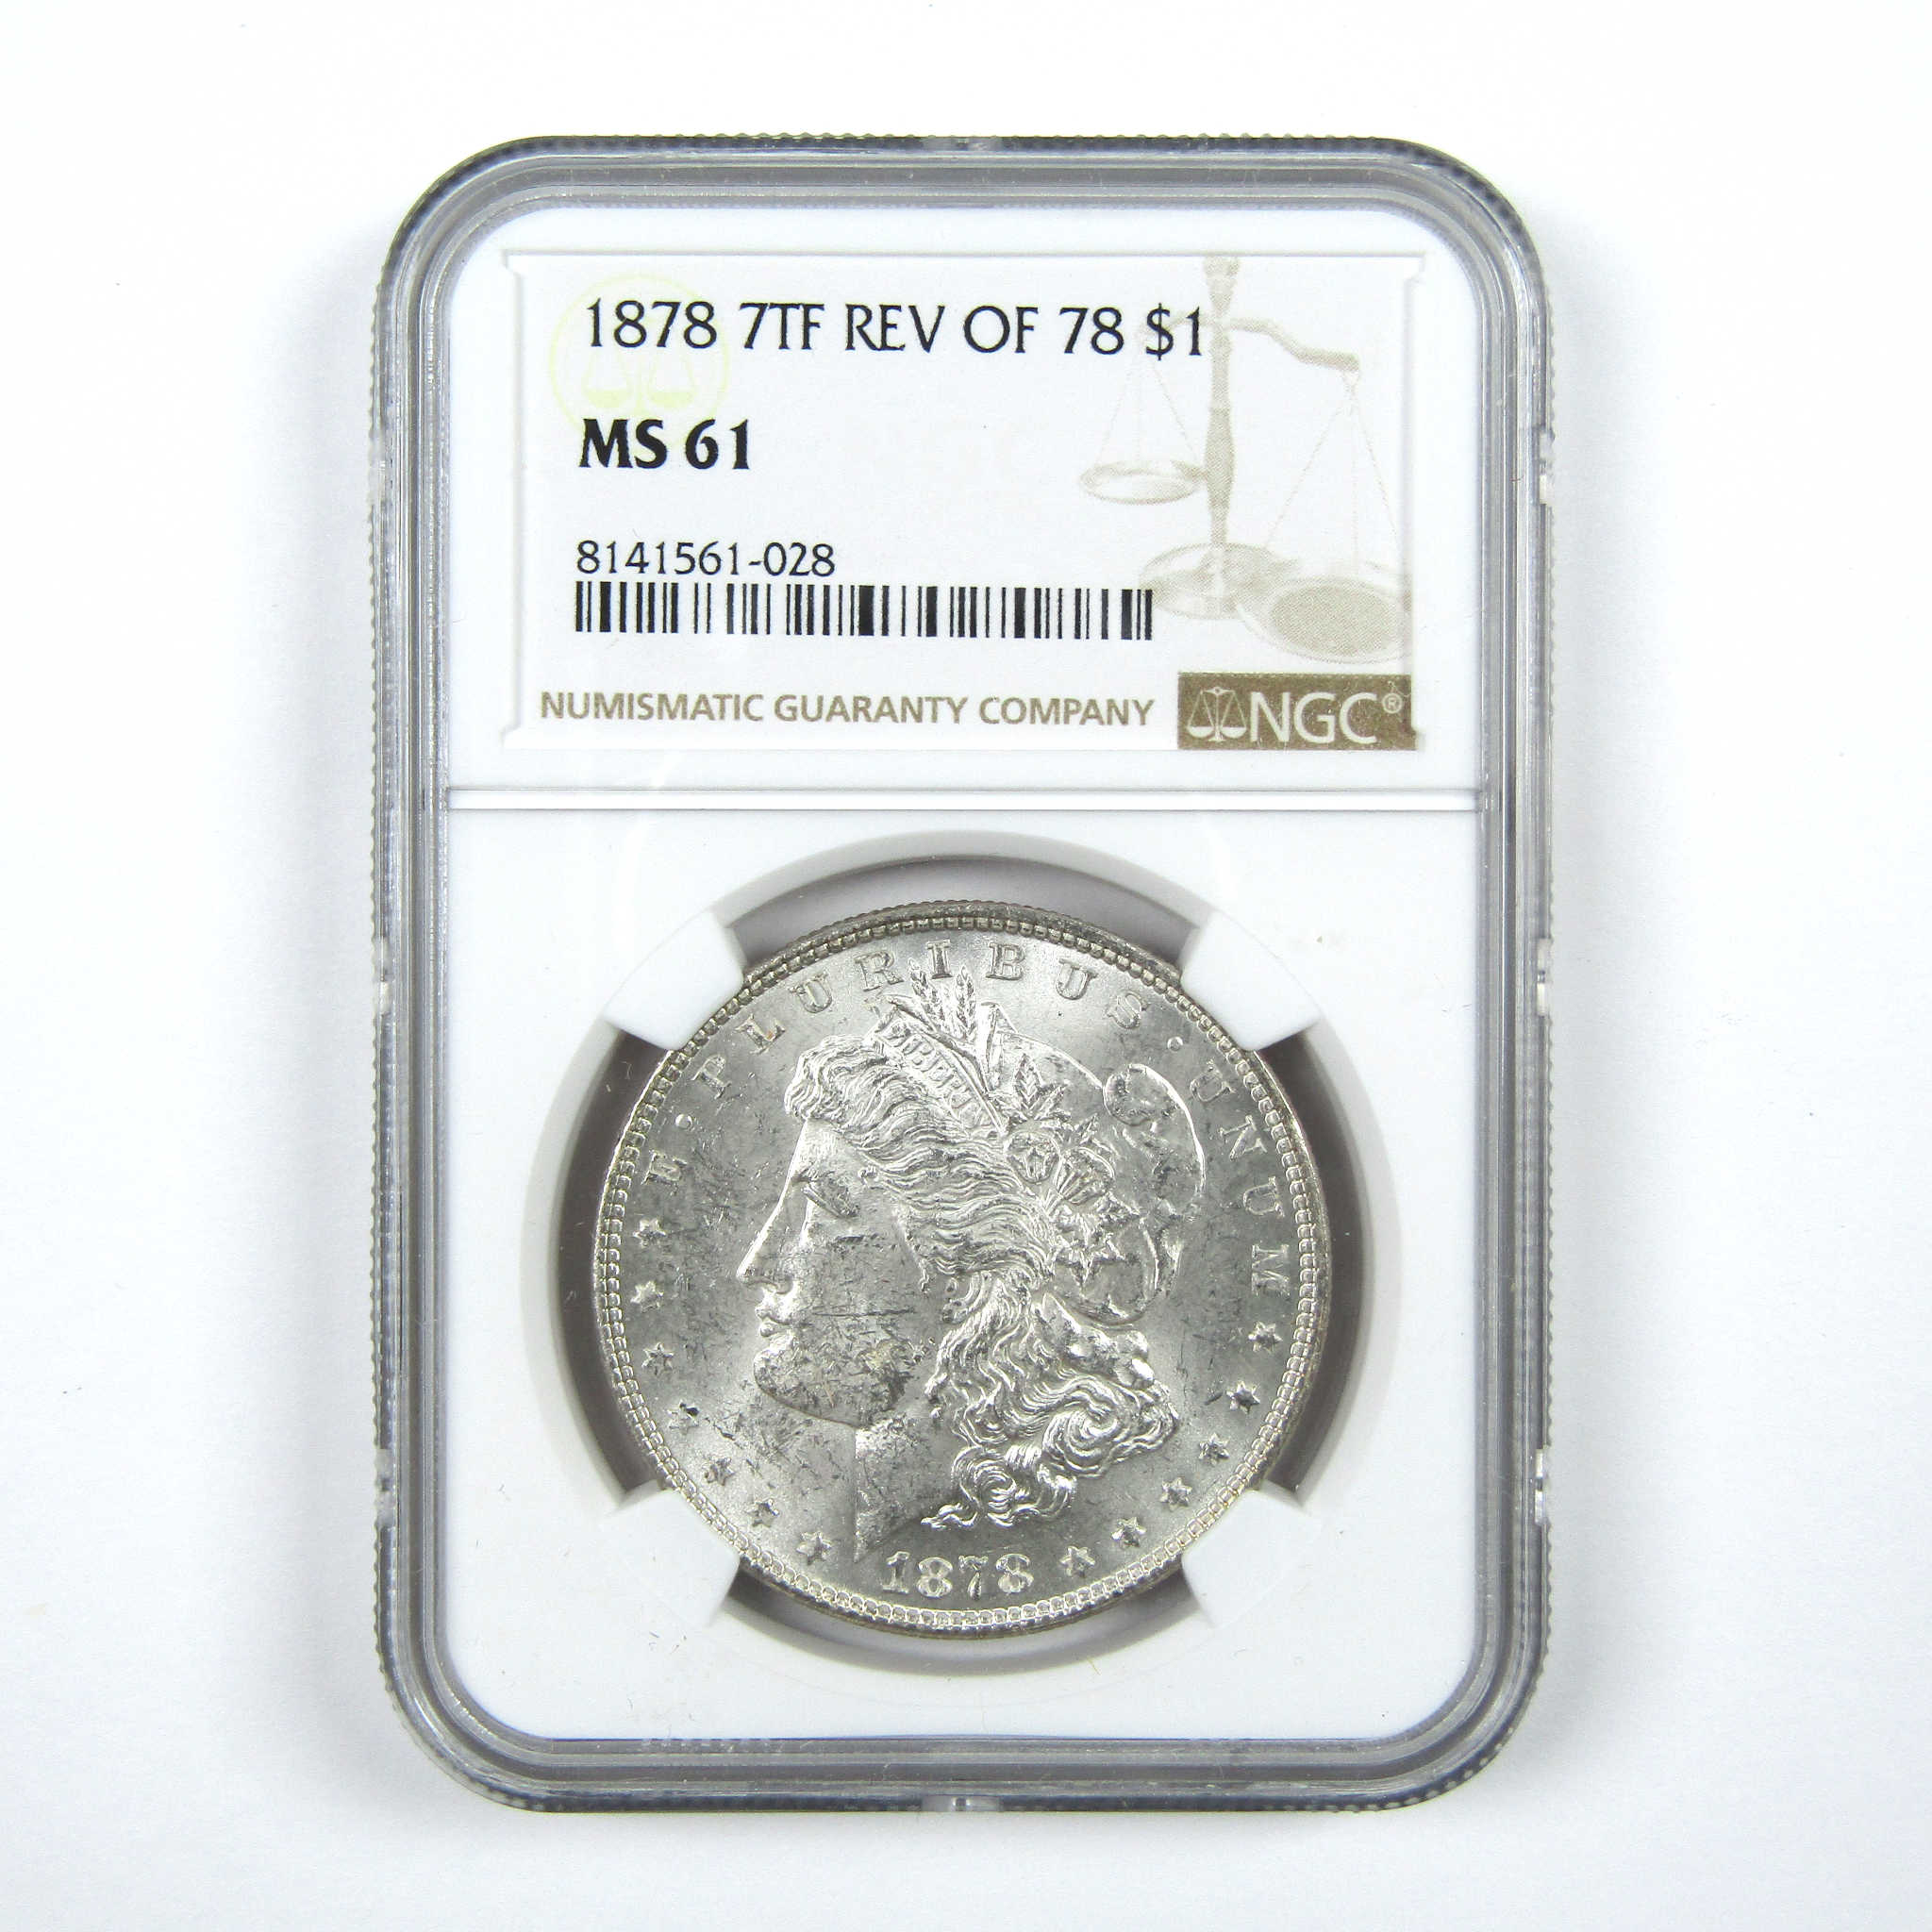 1878 7TF Rev 78 Morgan Dollar MS 61 NGC Uncirculated SKU:I14034 - Morgan coin - Morgan silver dollar - Morgan silver dollar for sale - Profile Coins &amp; Collectibles